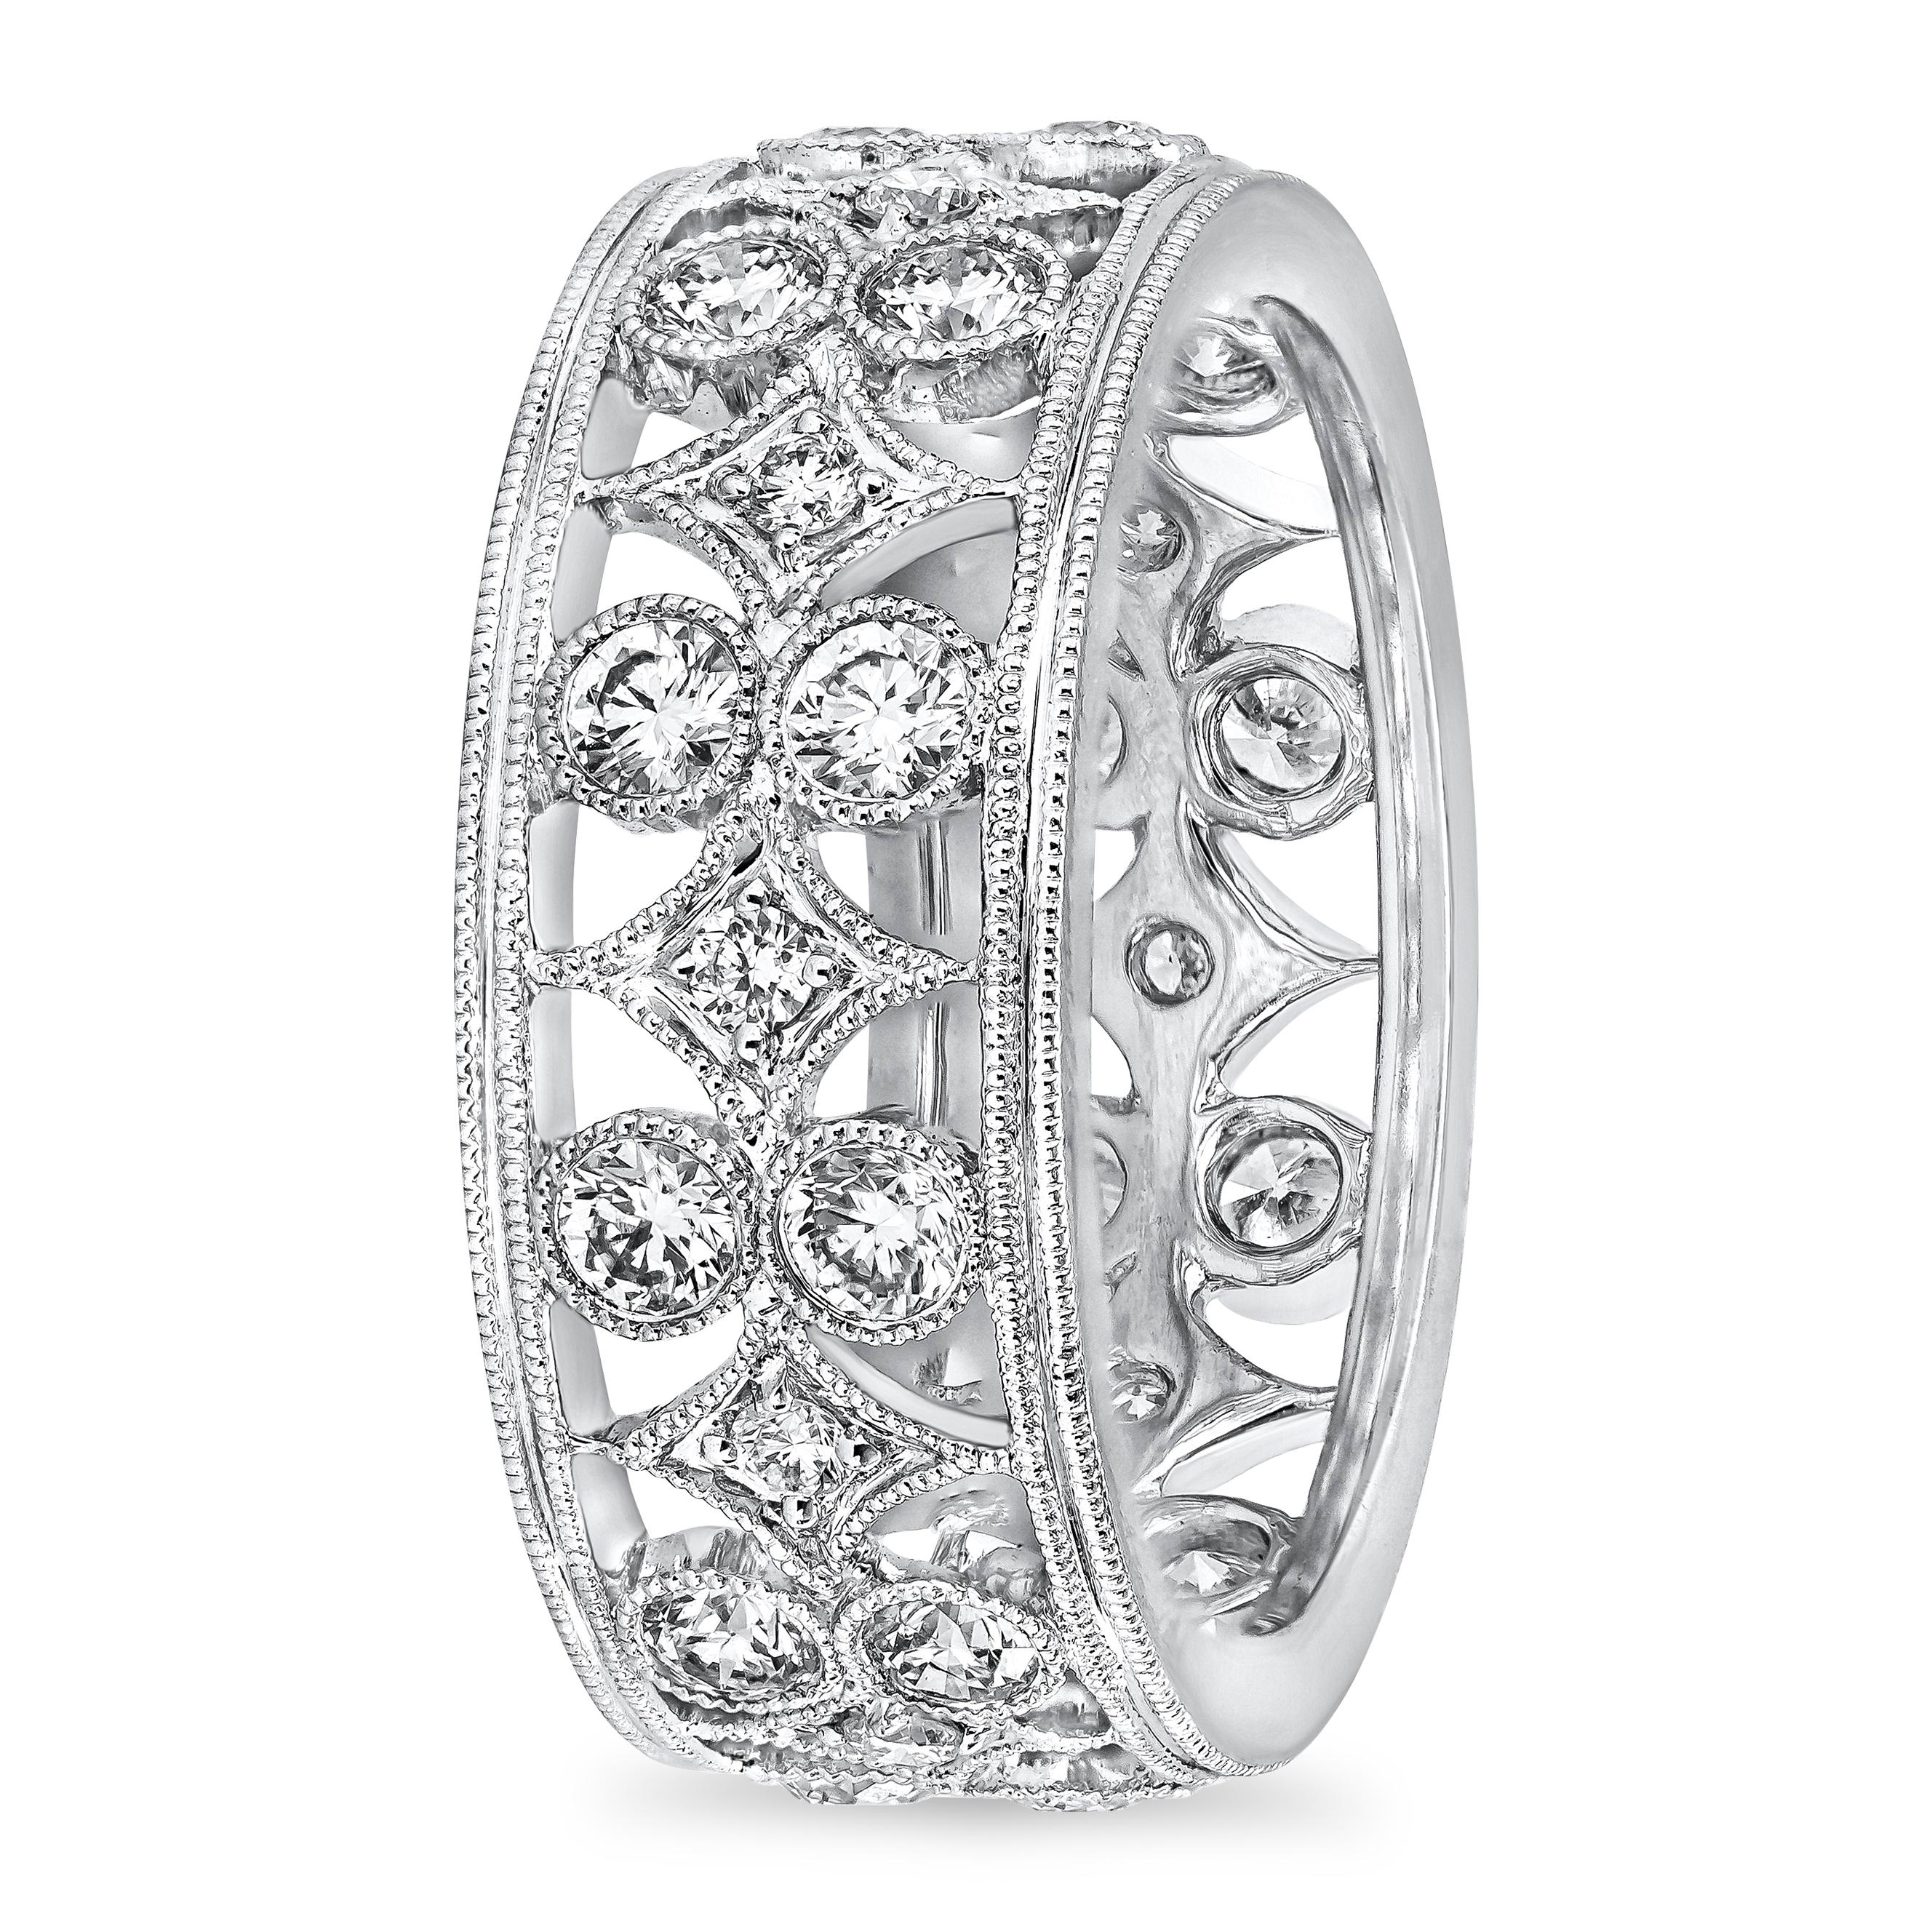 A fashionable and exquisite wedding band showcasing 1.18 carats total of brilliant round diamonds set in a open-work intricate design. Hand engraved with milgrain edges for an antique finished. Finely set in 18k white gold. Size 6.5 US resizable